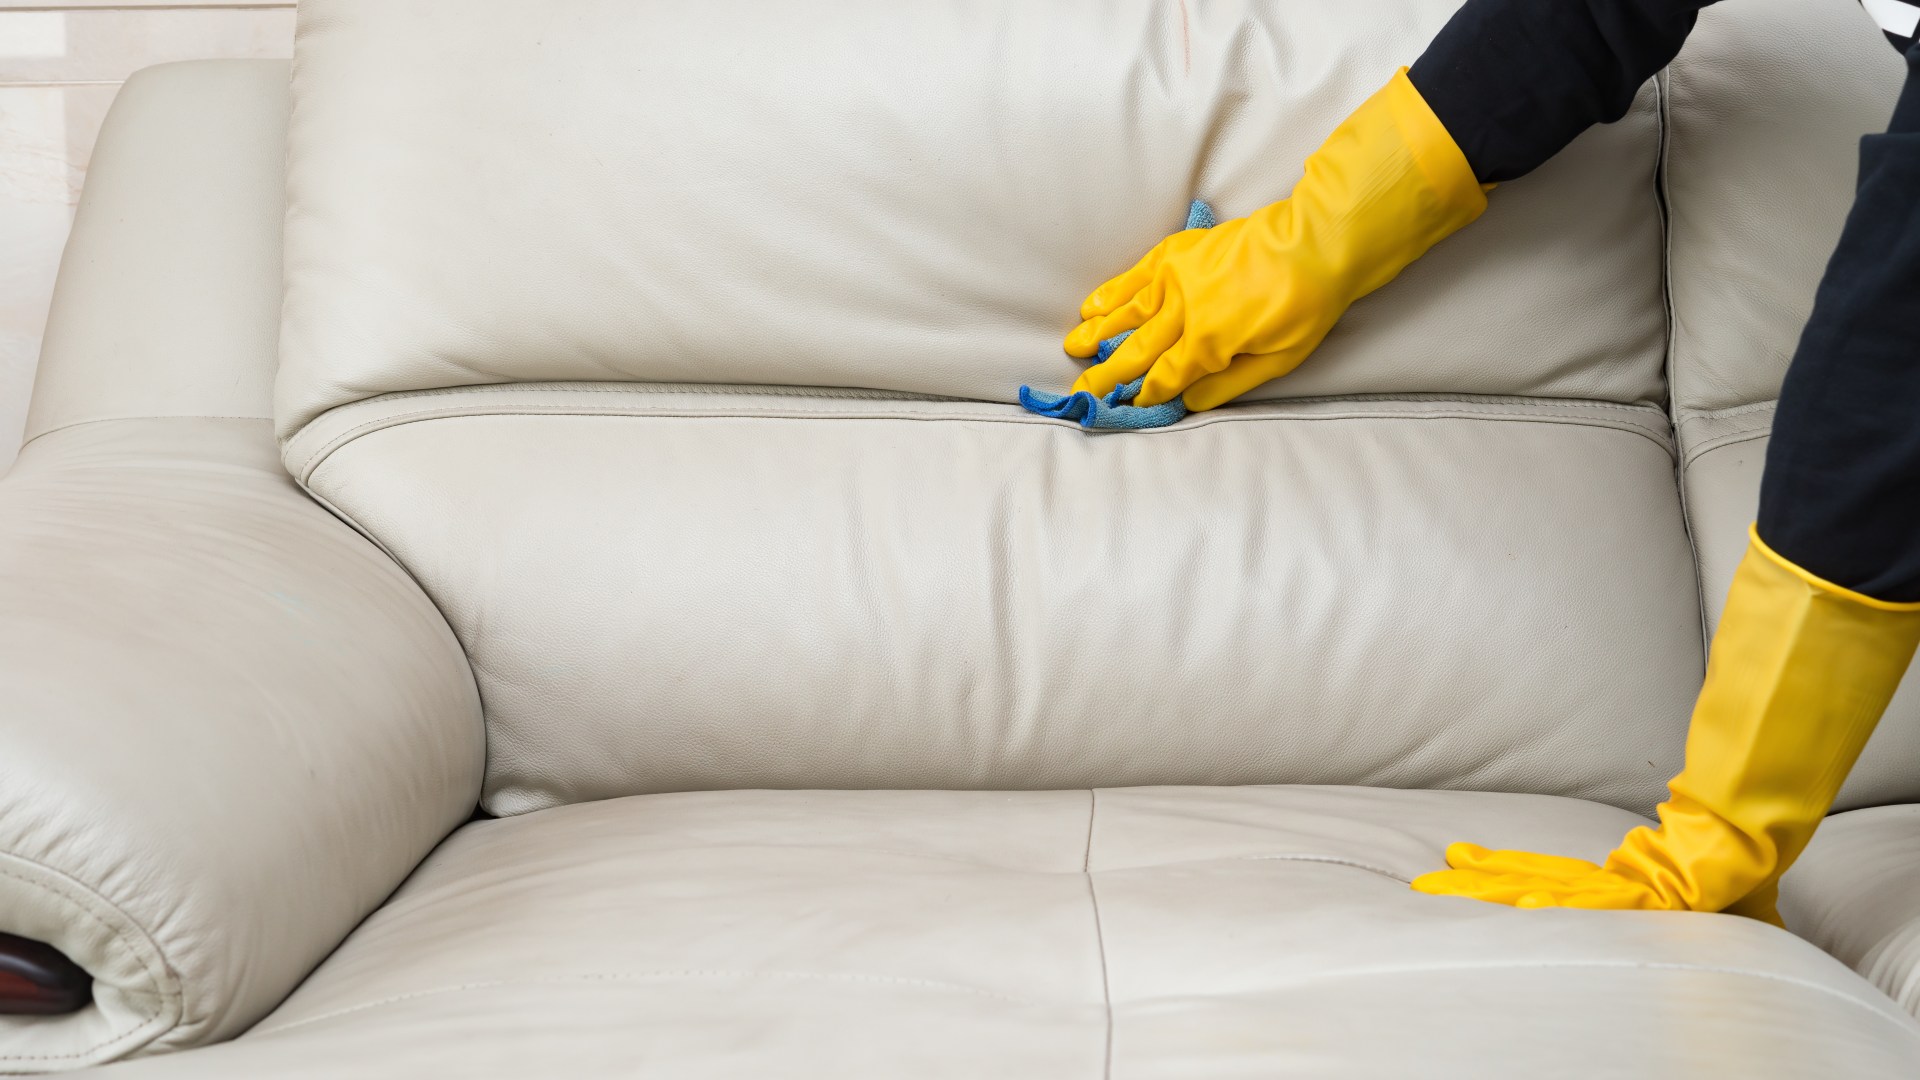 How To Clean Stain From Leather Sofa